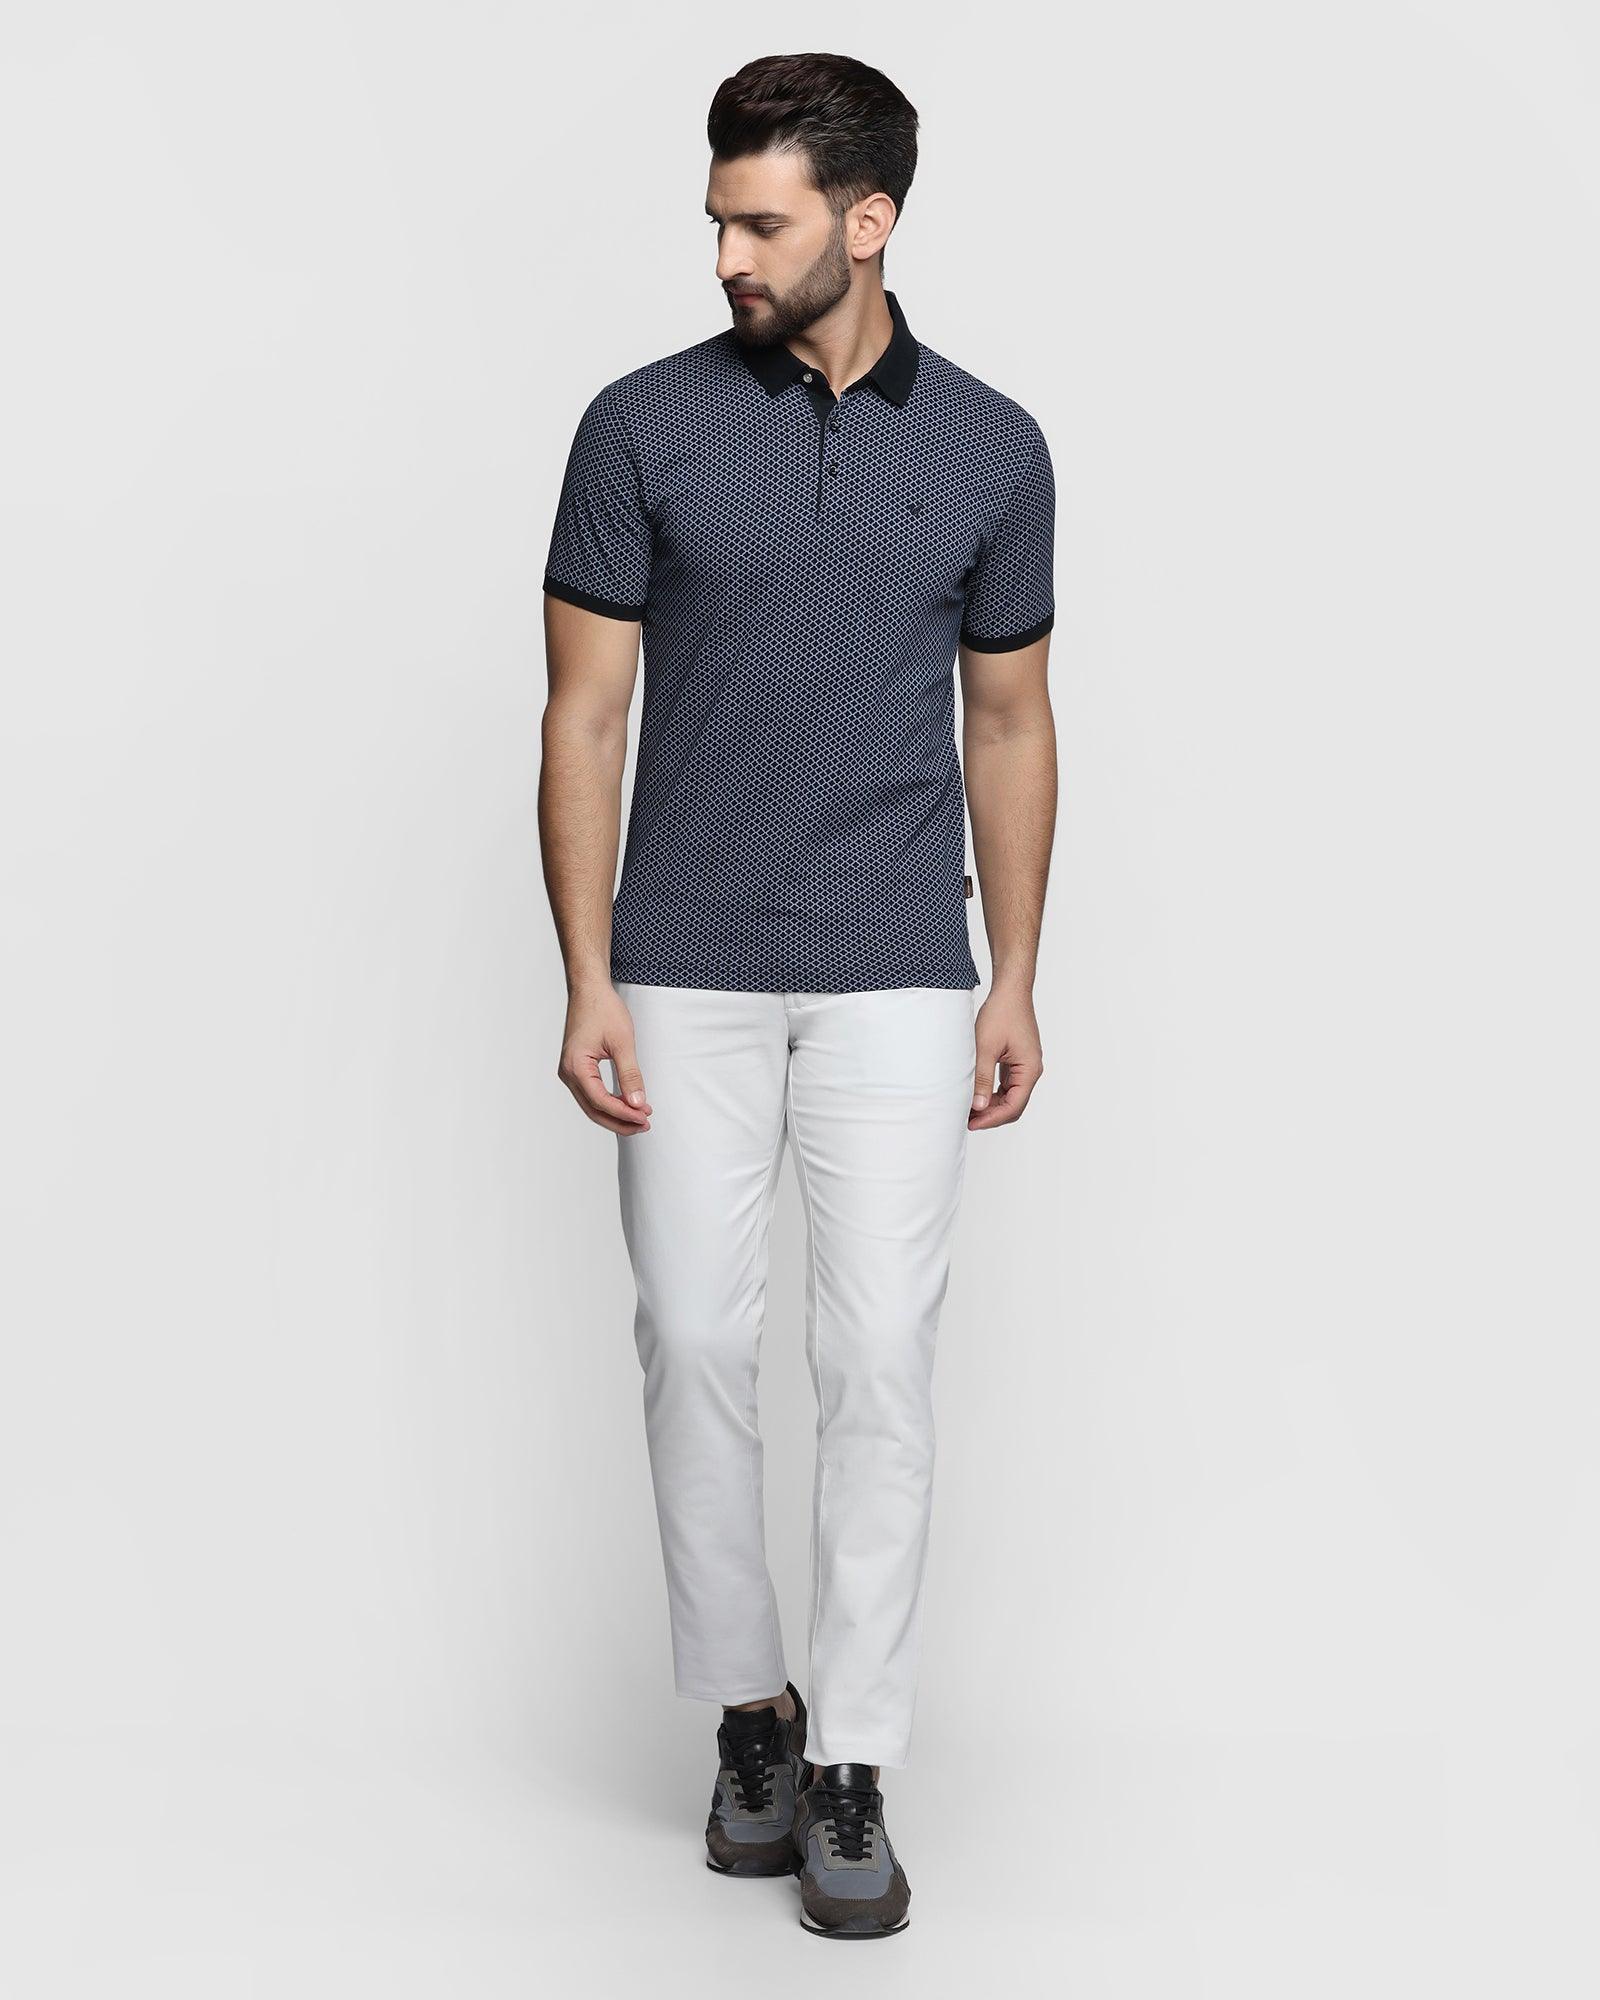 Louis Philippe Polo T-Shirts : Buy Louis Philippe Men Blue Printed Polo T- Shirt Online